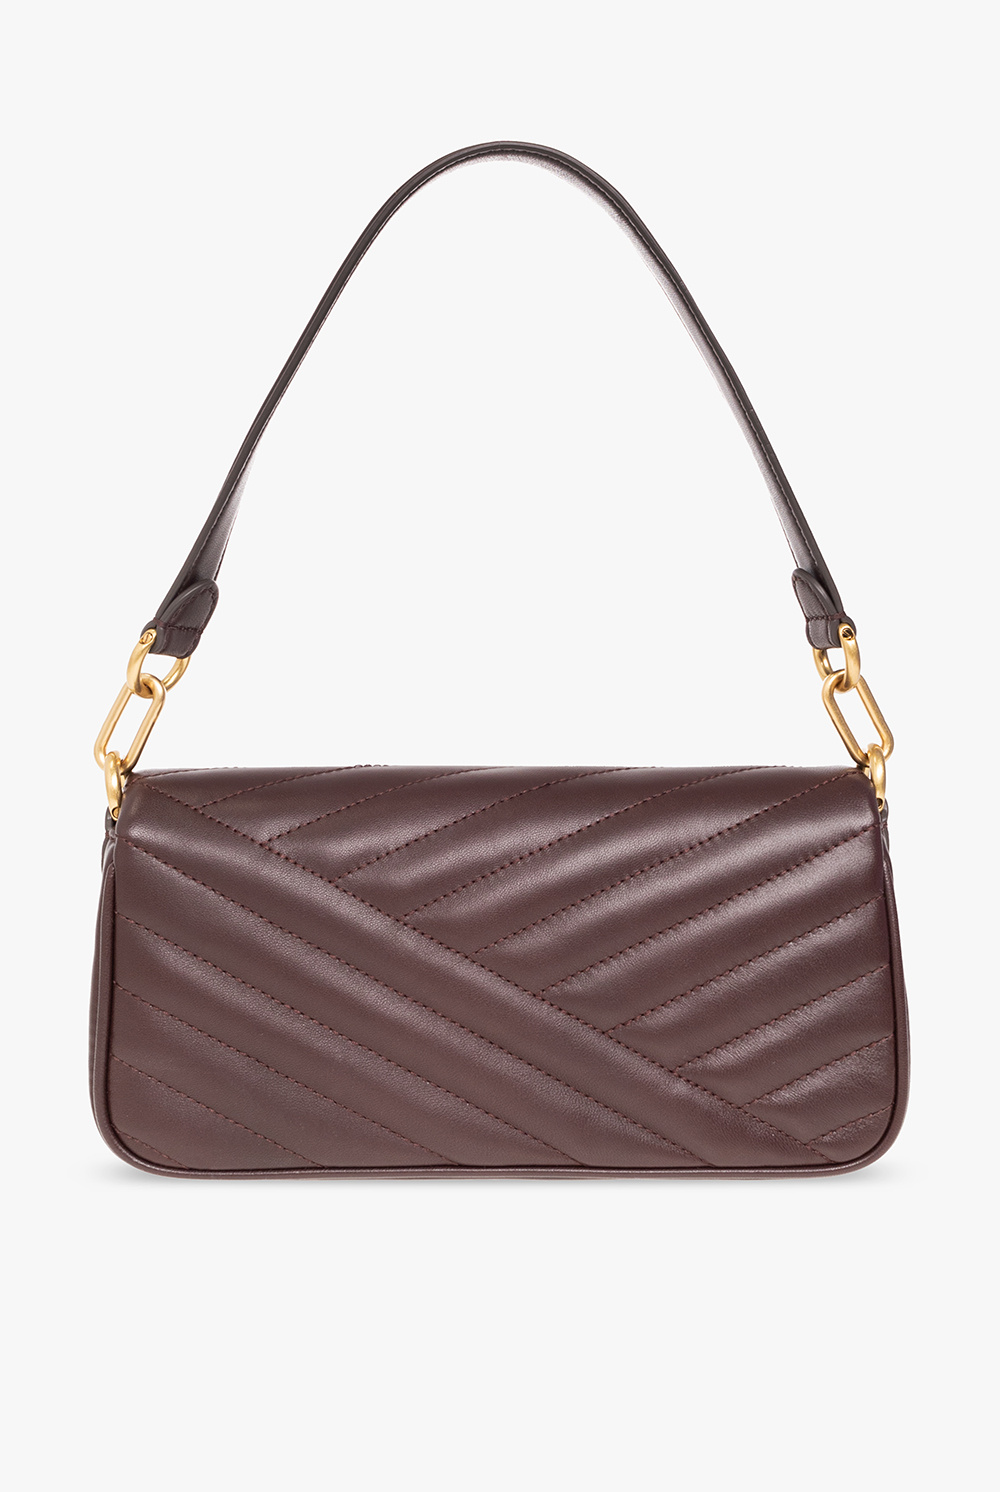 Tory Burch ‘Kira Small’ quilted bag